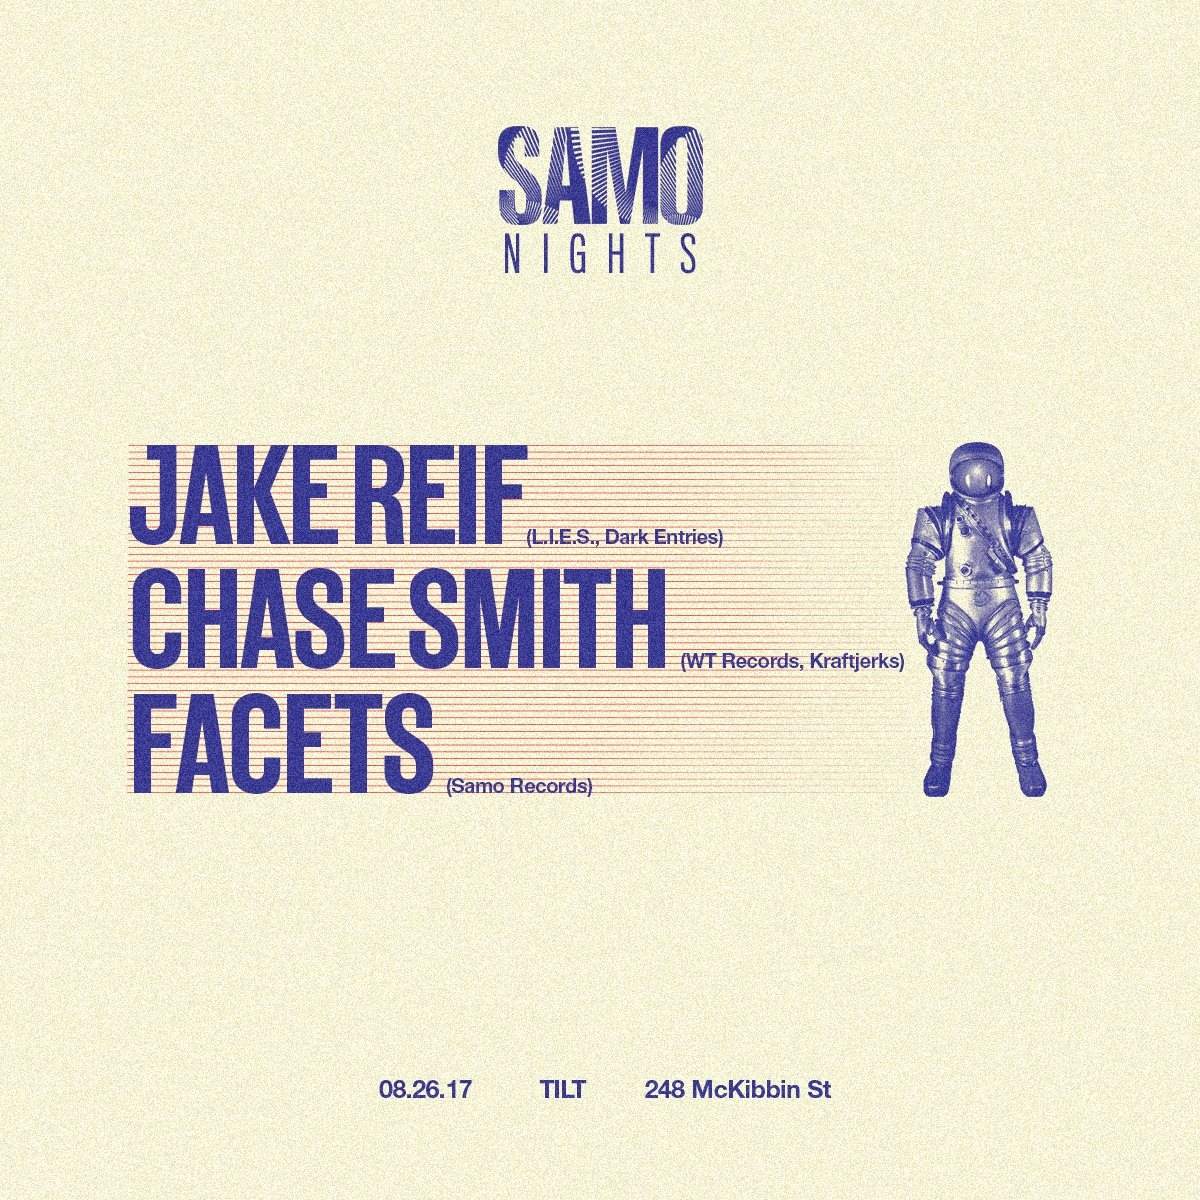 Samo Nights: Jake Reif (L.I.E.S.), Chase Smith & Facets - フライヤー表